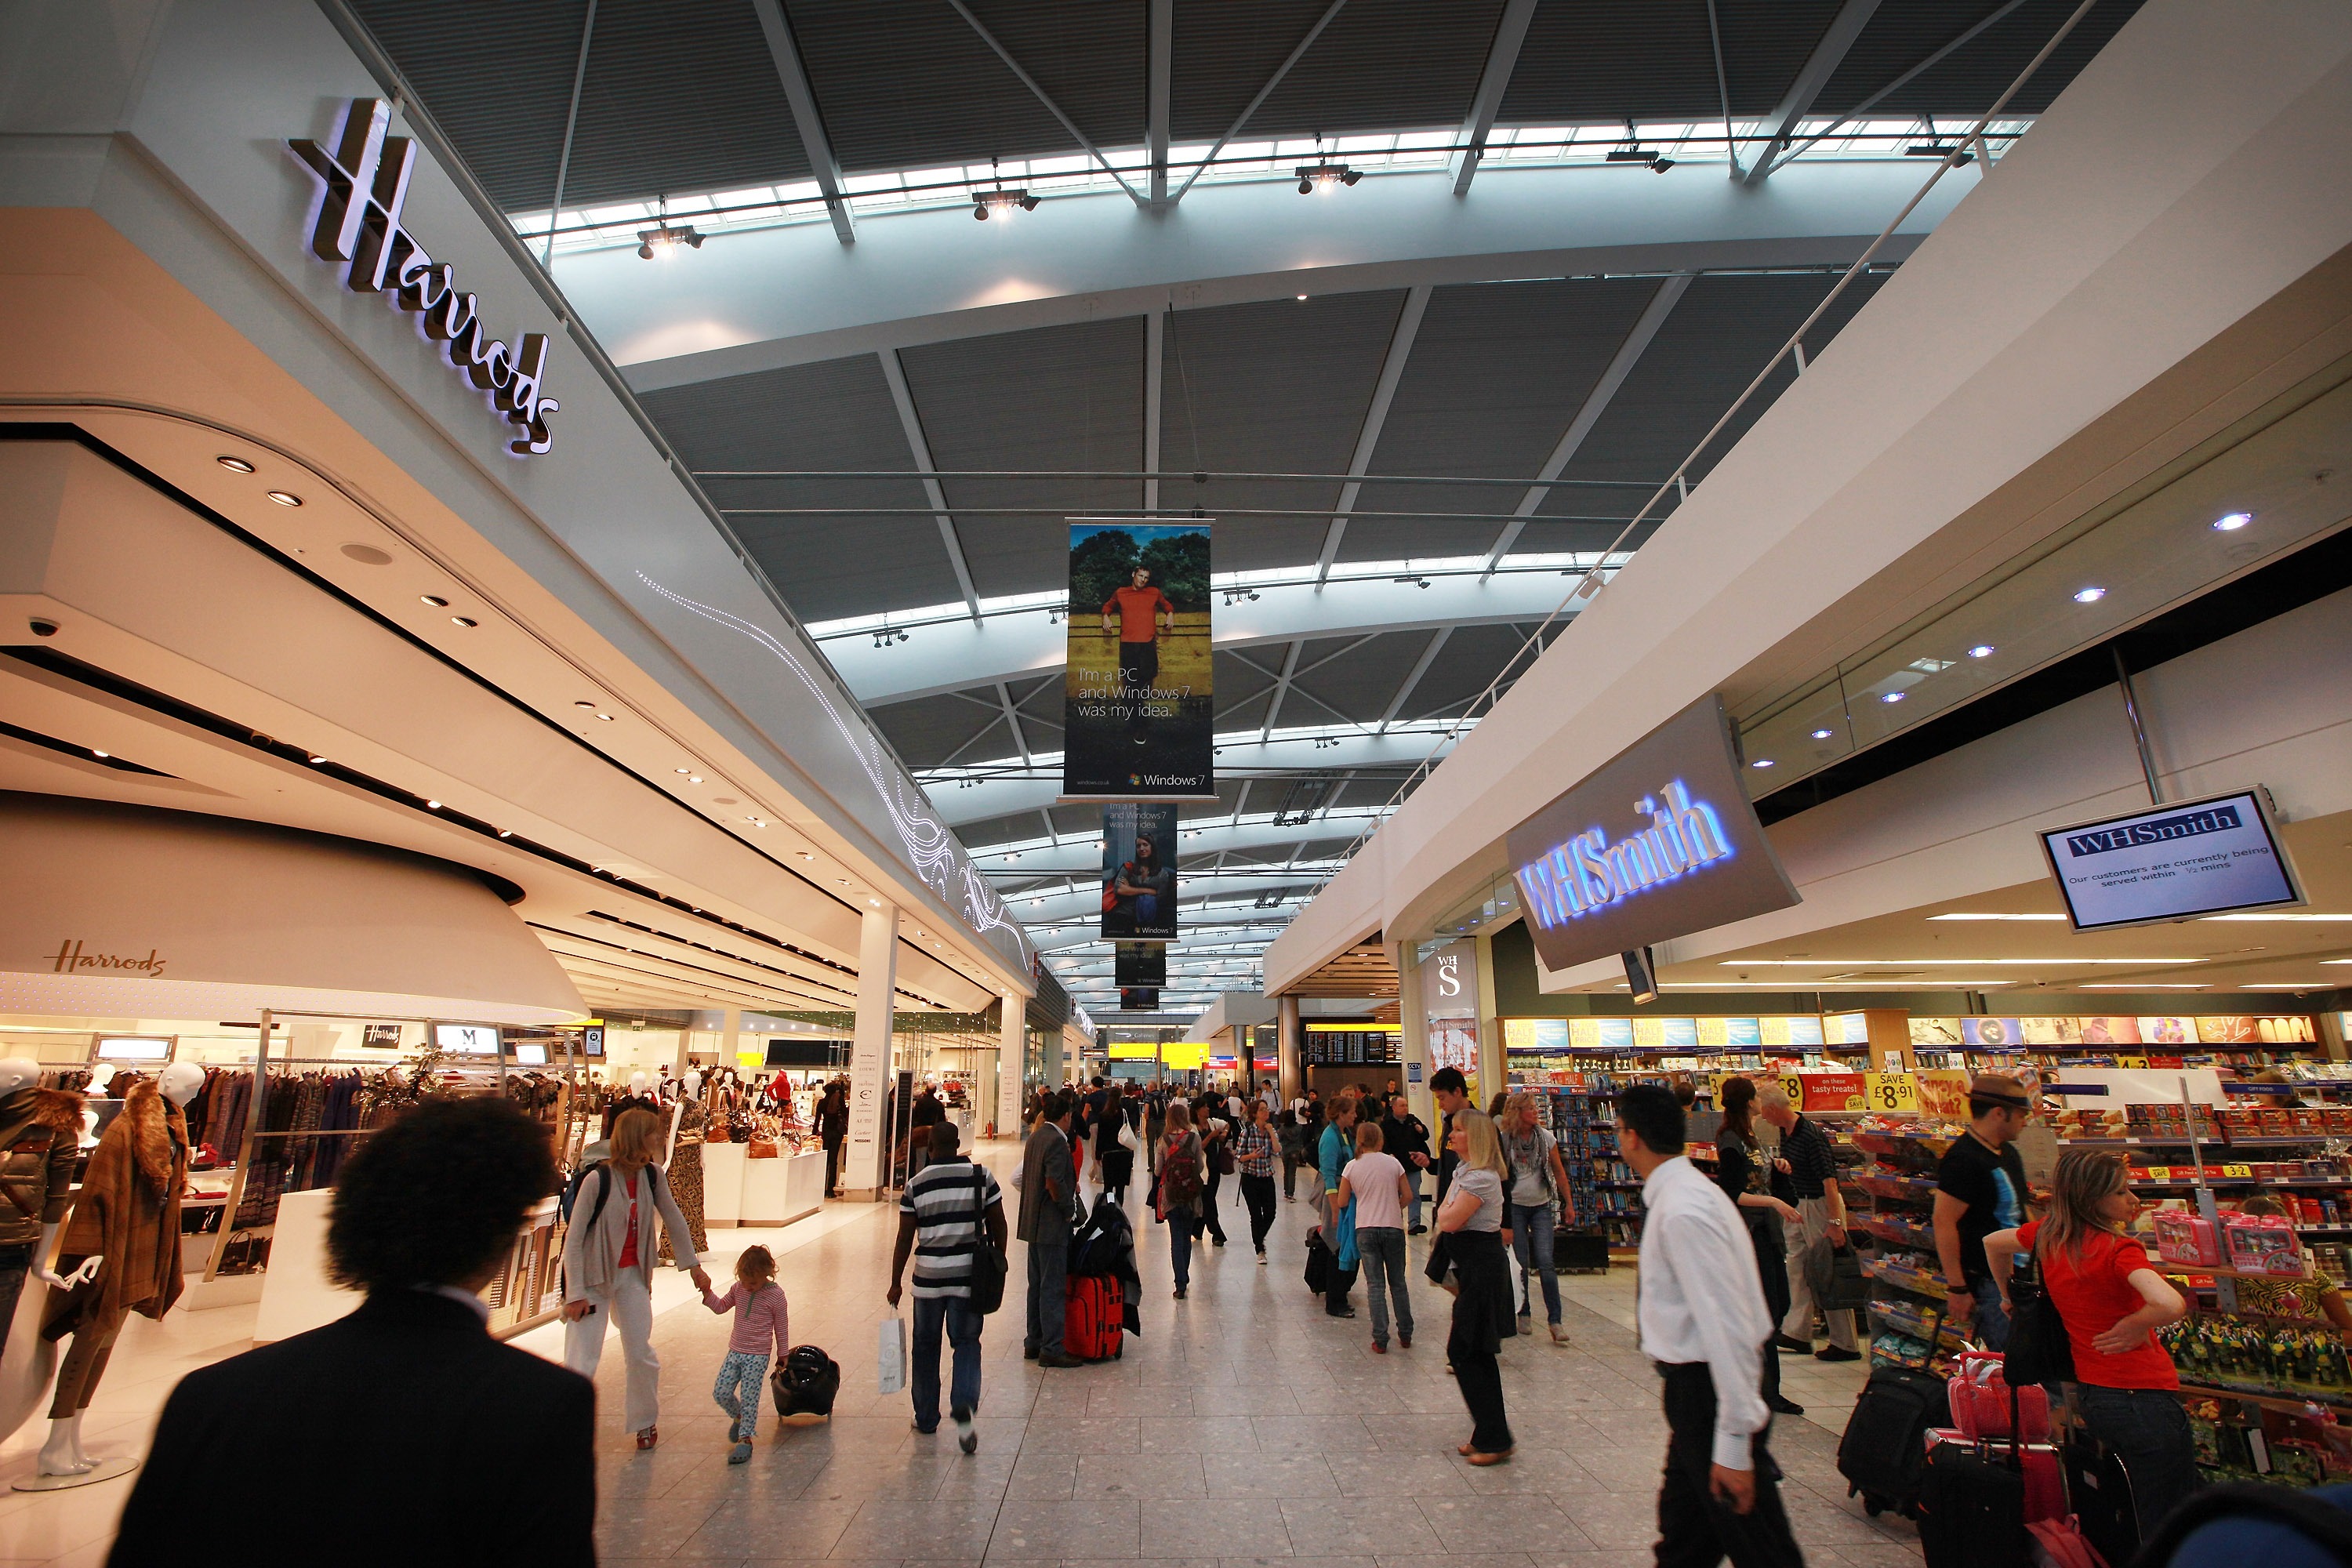 Behind The Scenes At Heathrow's Terminal Five